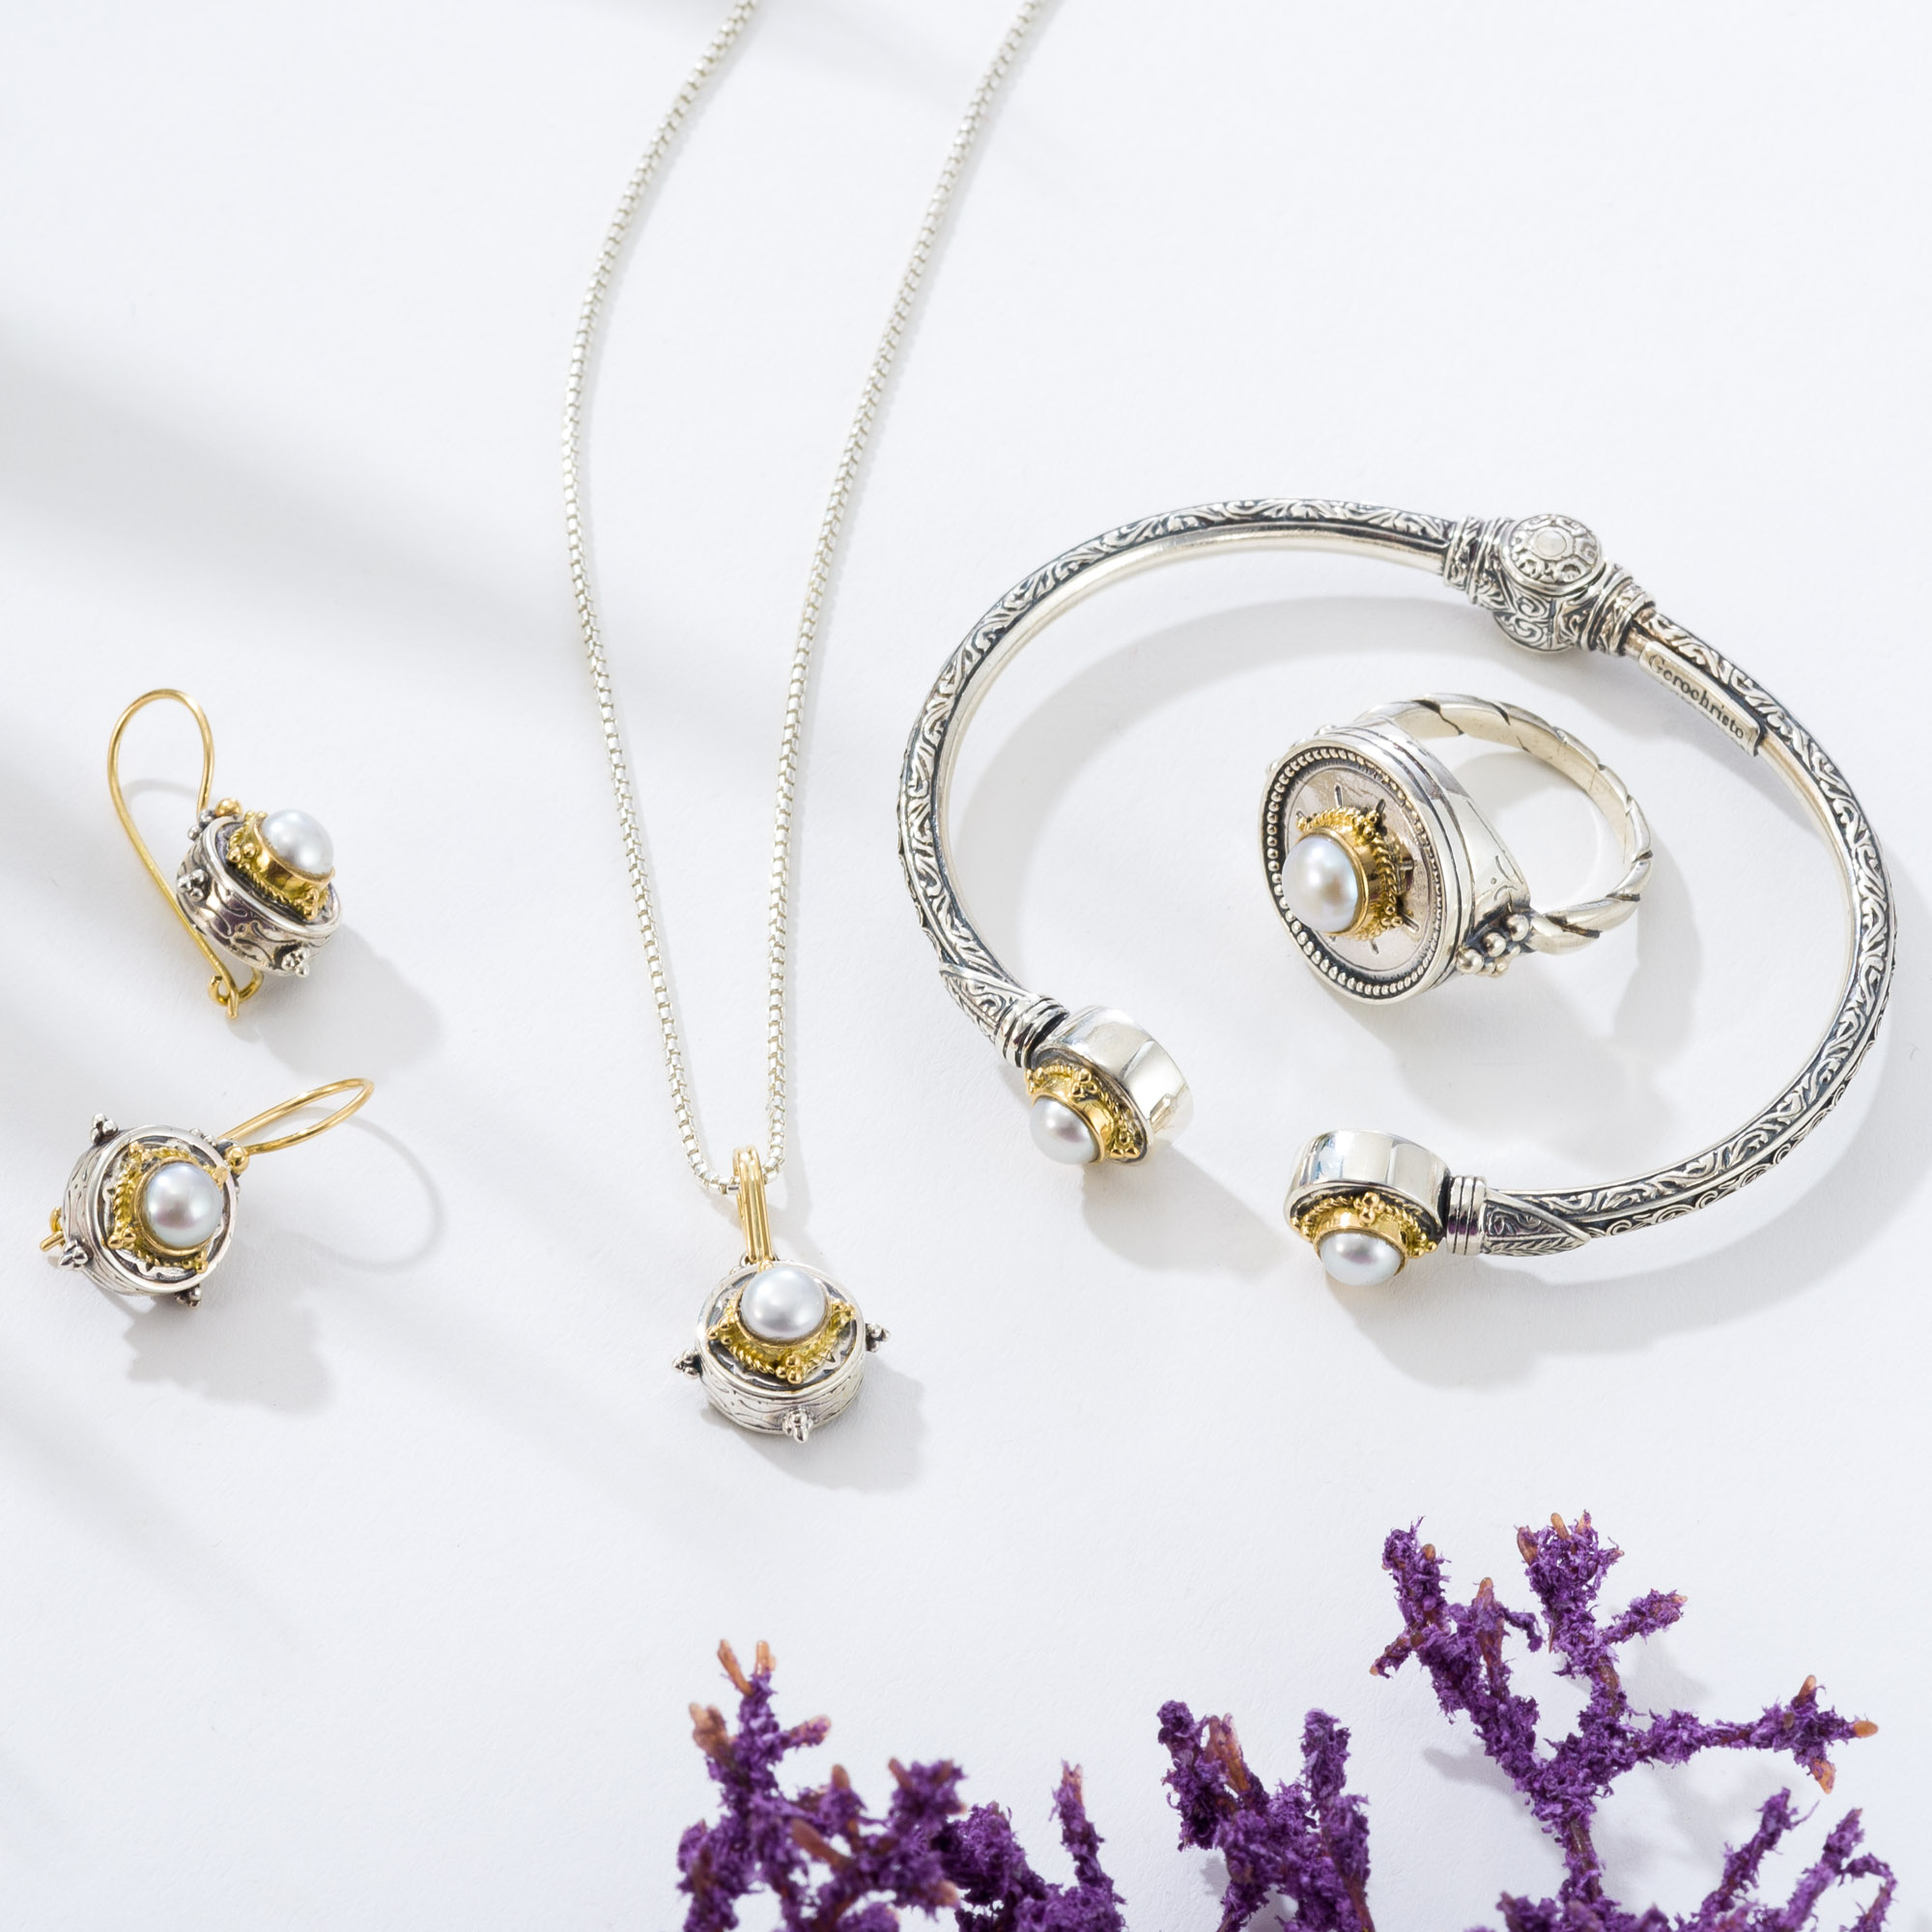 Cyclades Round set in 18K Gold and Sterling silver